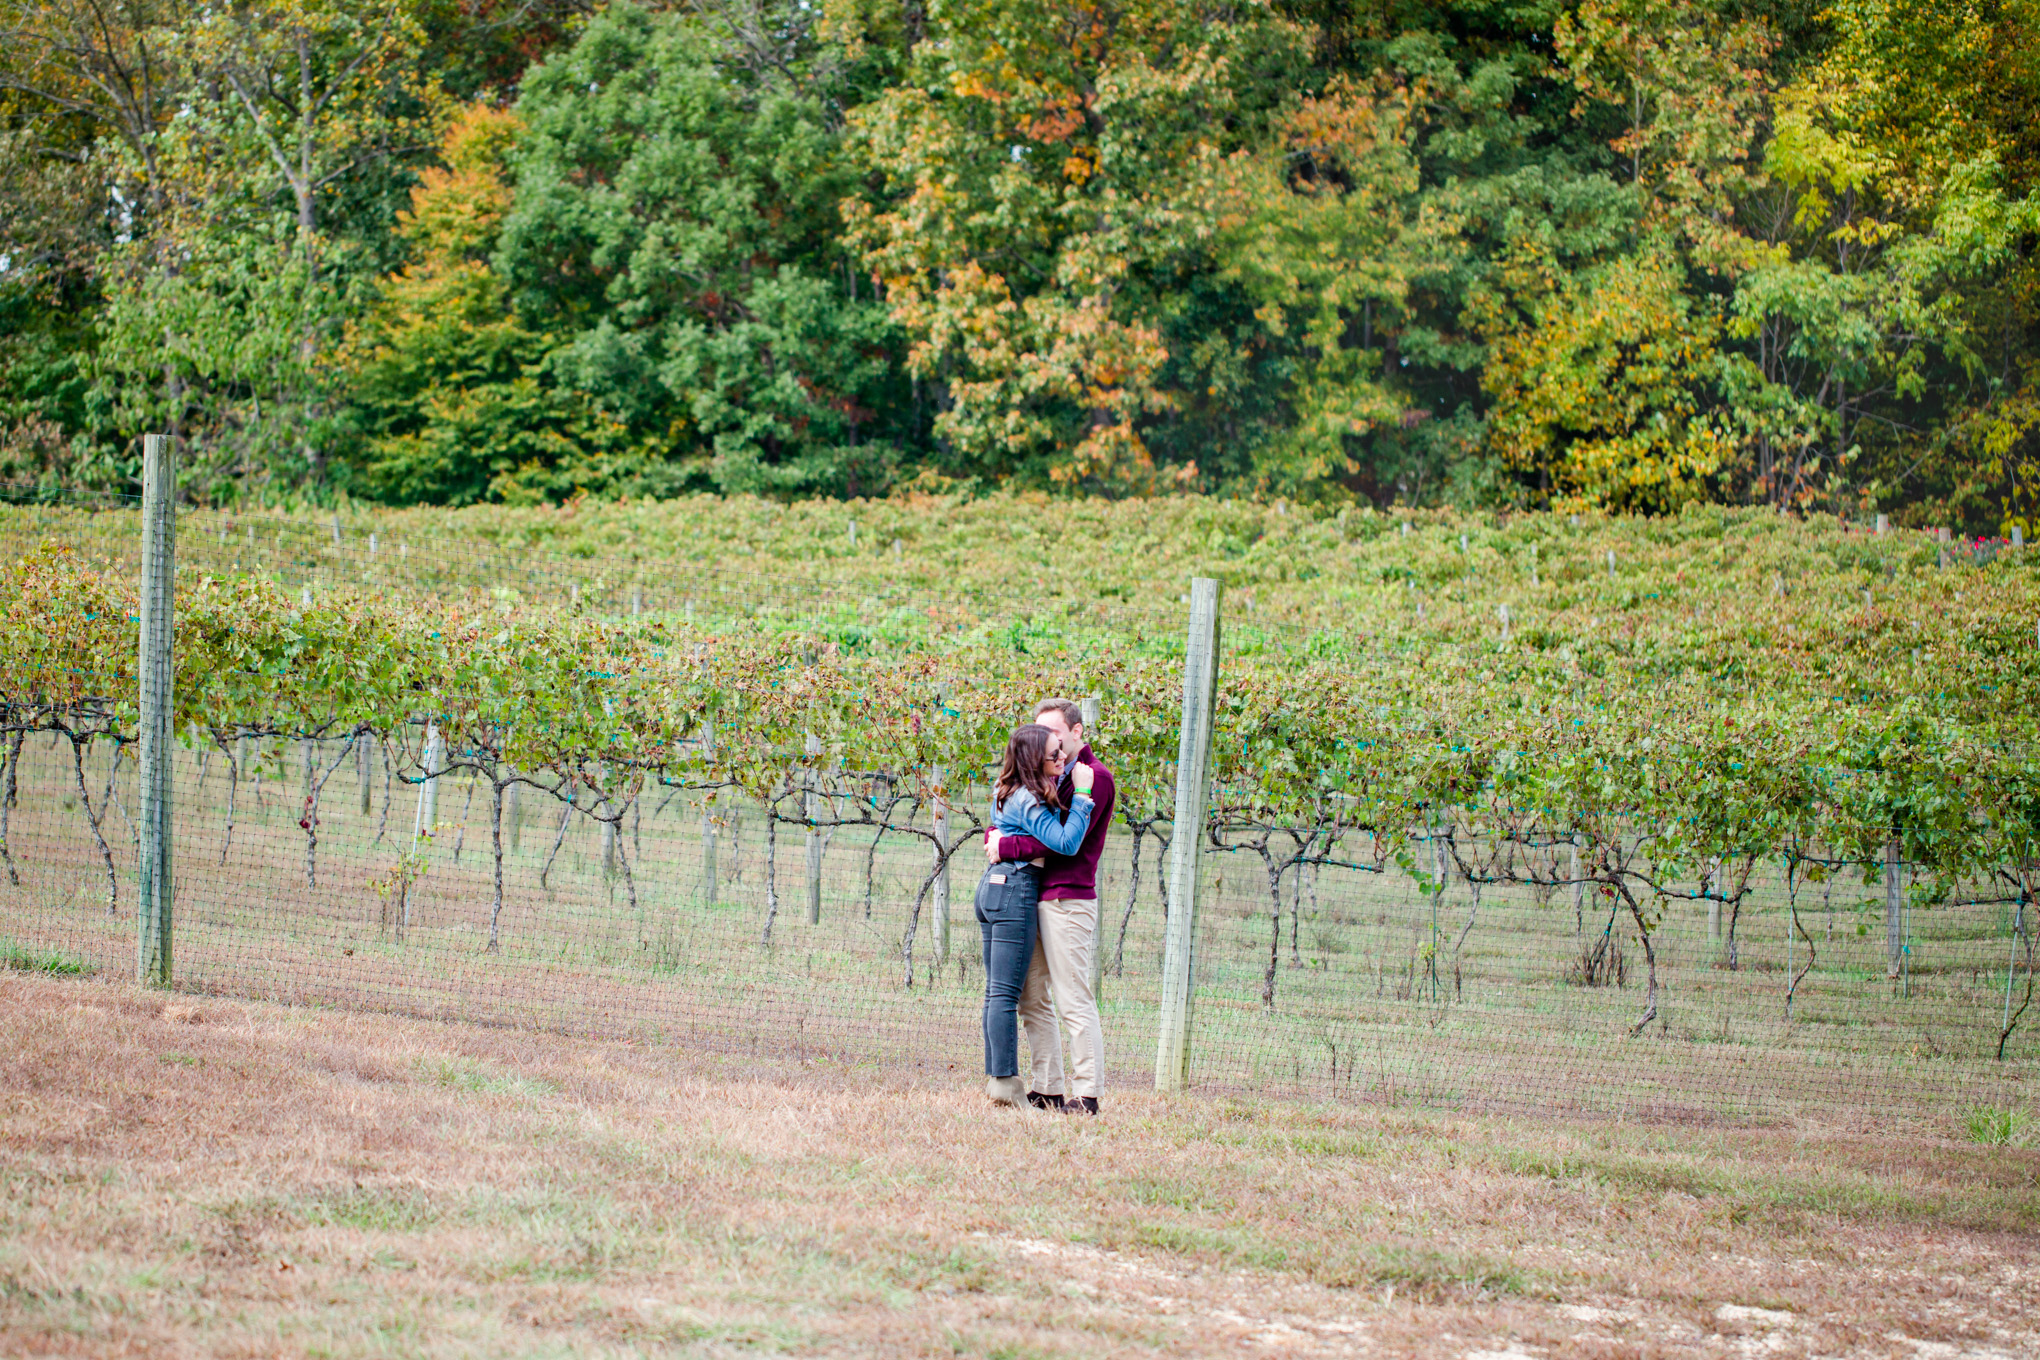 Running Hare Vineyard surprise proposal, Maryland winery, Maryland proposal photographer, D.C. proposal photographer, Maryland engagement, surprise proposal, Running Hare Vineyard proposal, Running Hare Vineyard, D.C. wedding photographer, Rachel E.H. Photography, autumn proposal, autumn surprise proposal, couple hugging